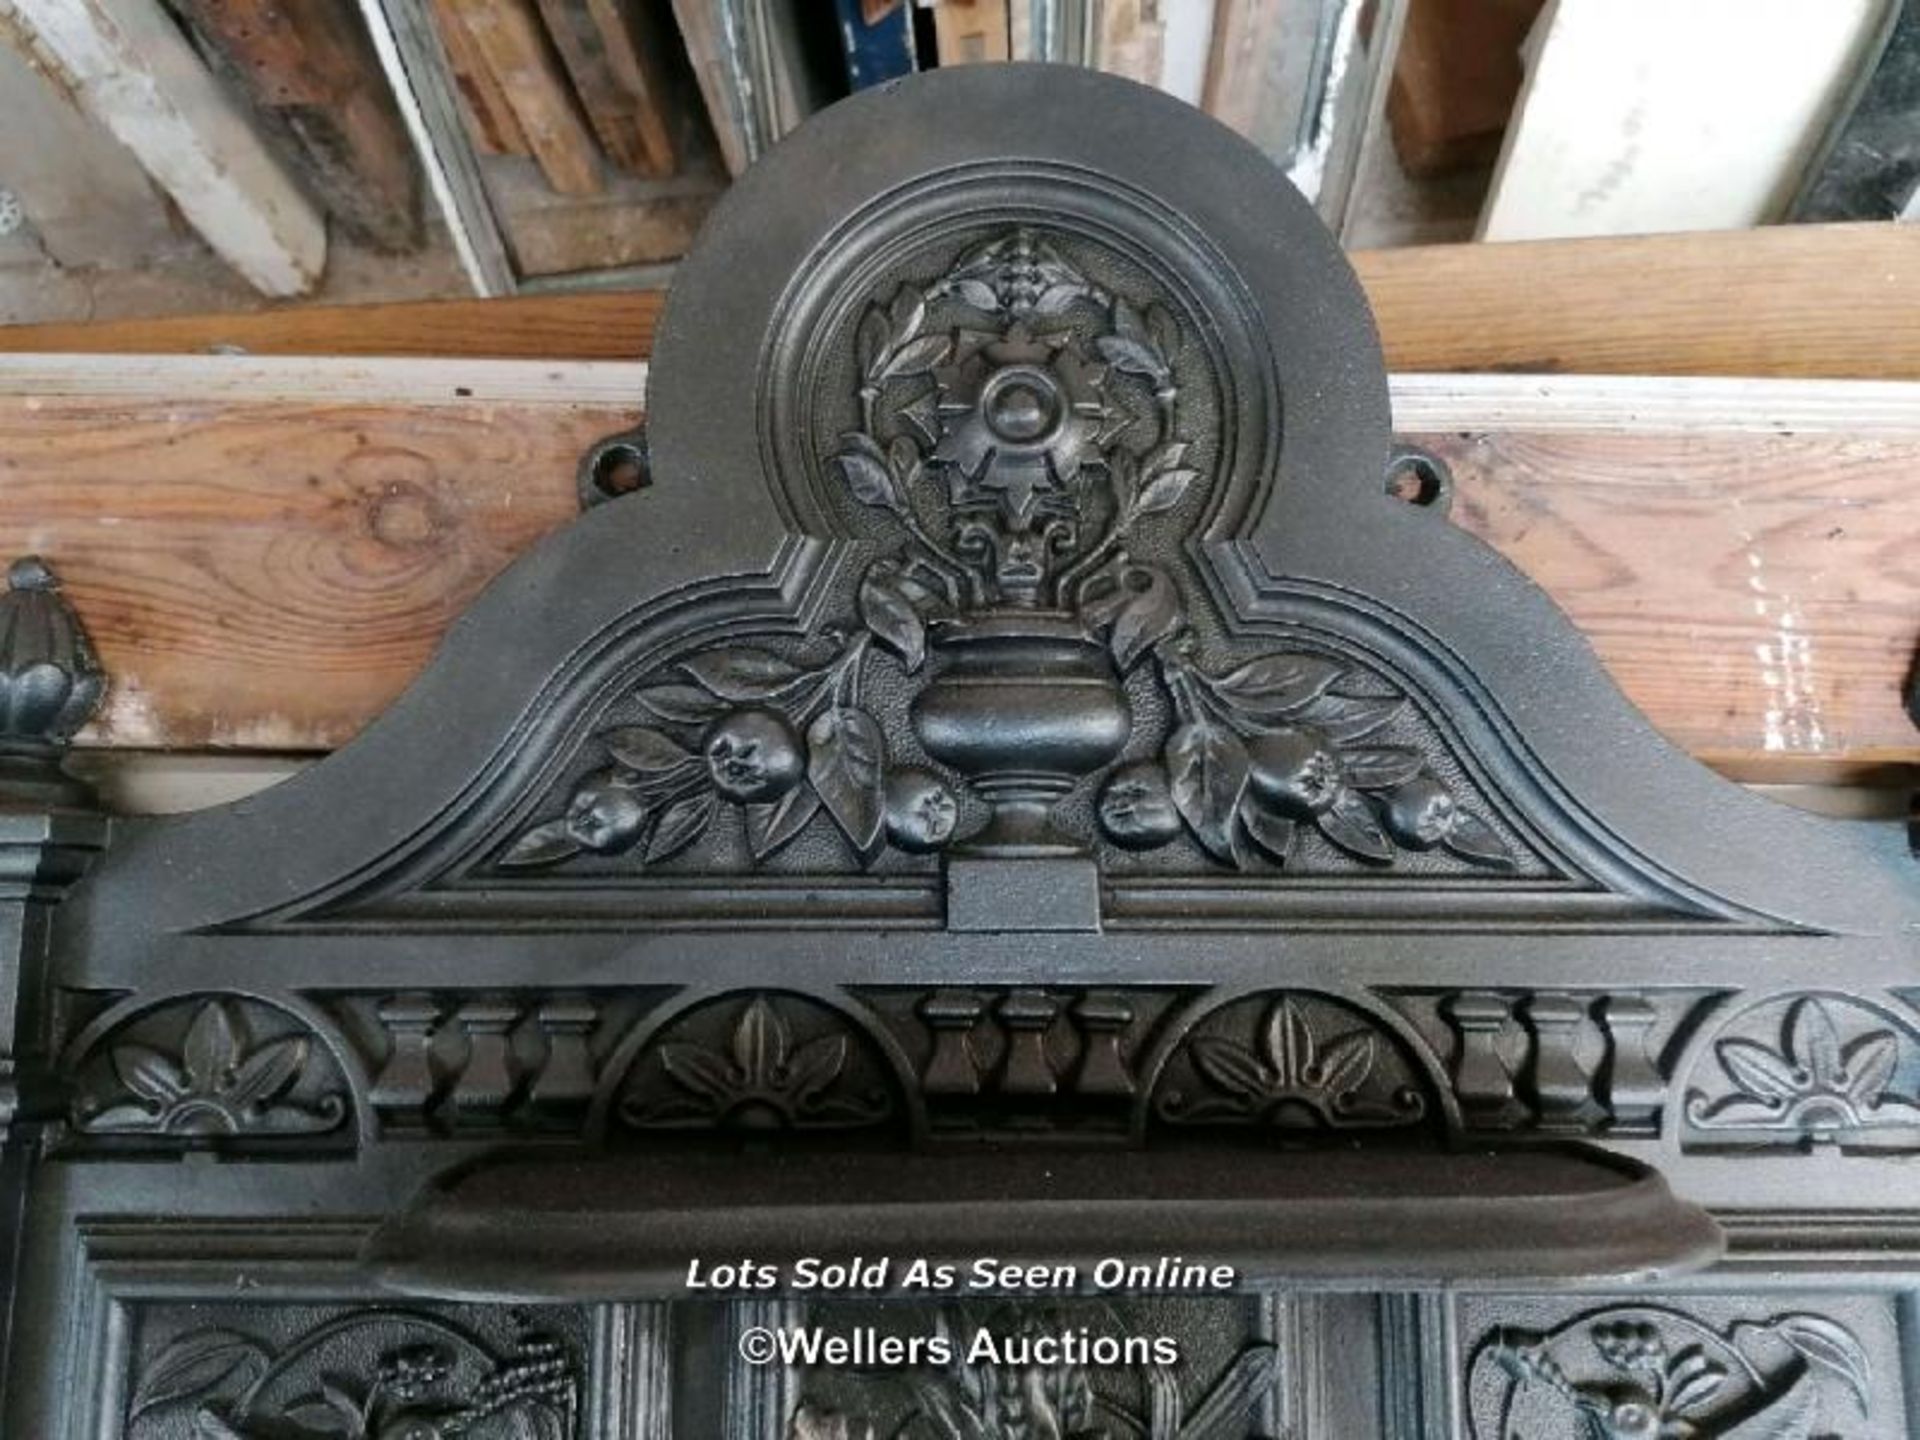 Original Victorian Cast iron bedroom fireplace. Combination design with decorative top with angel or - Image 2 of 6